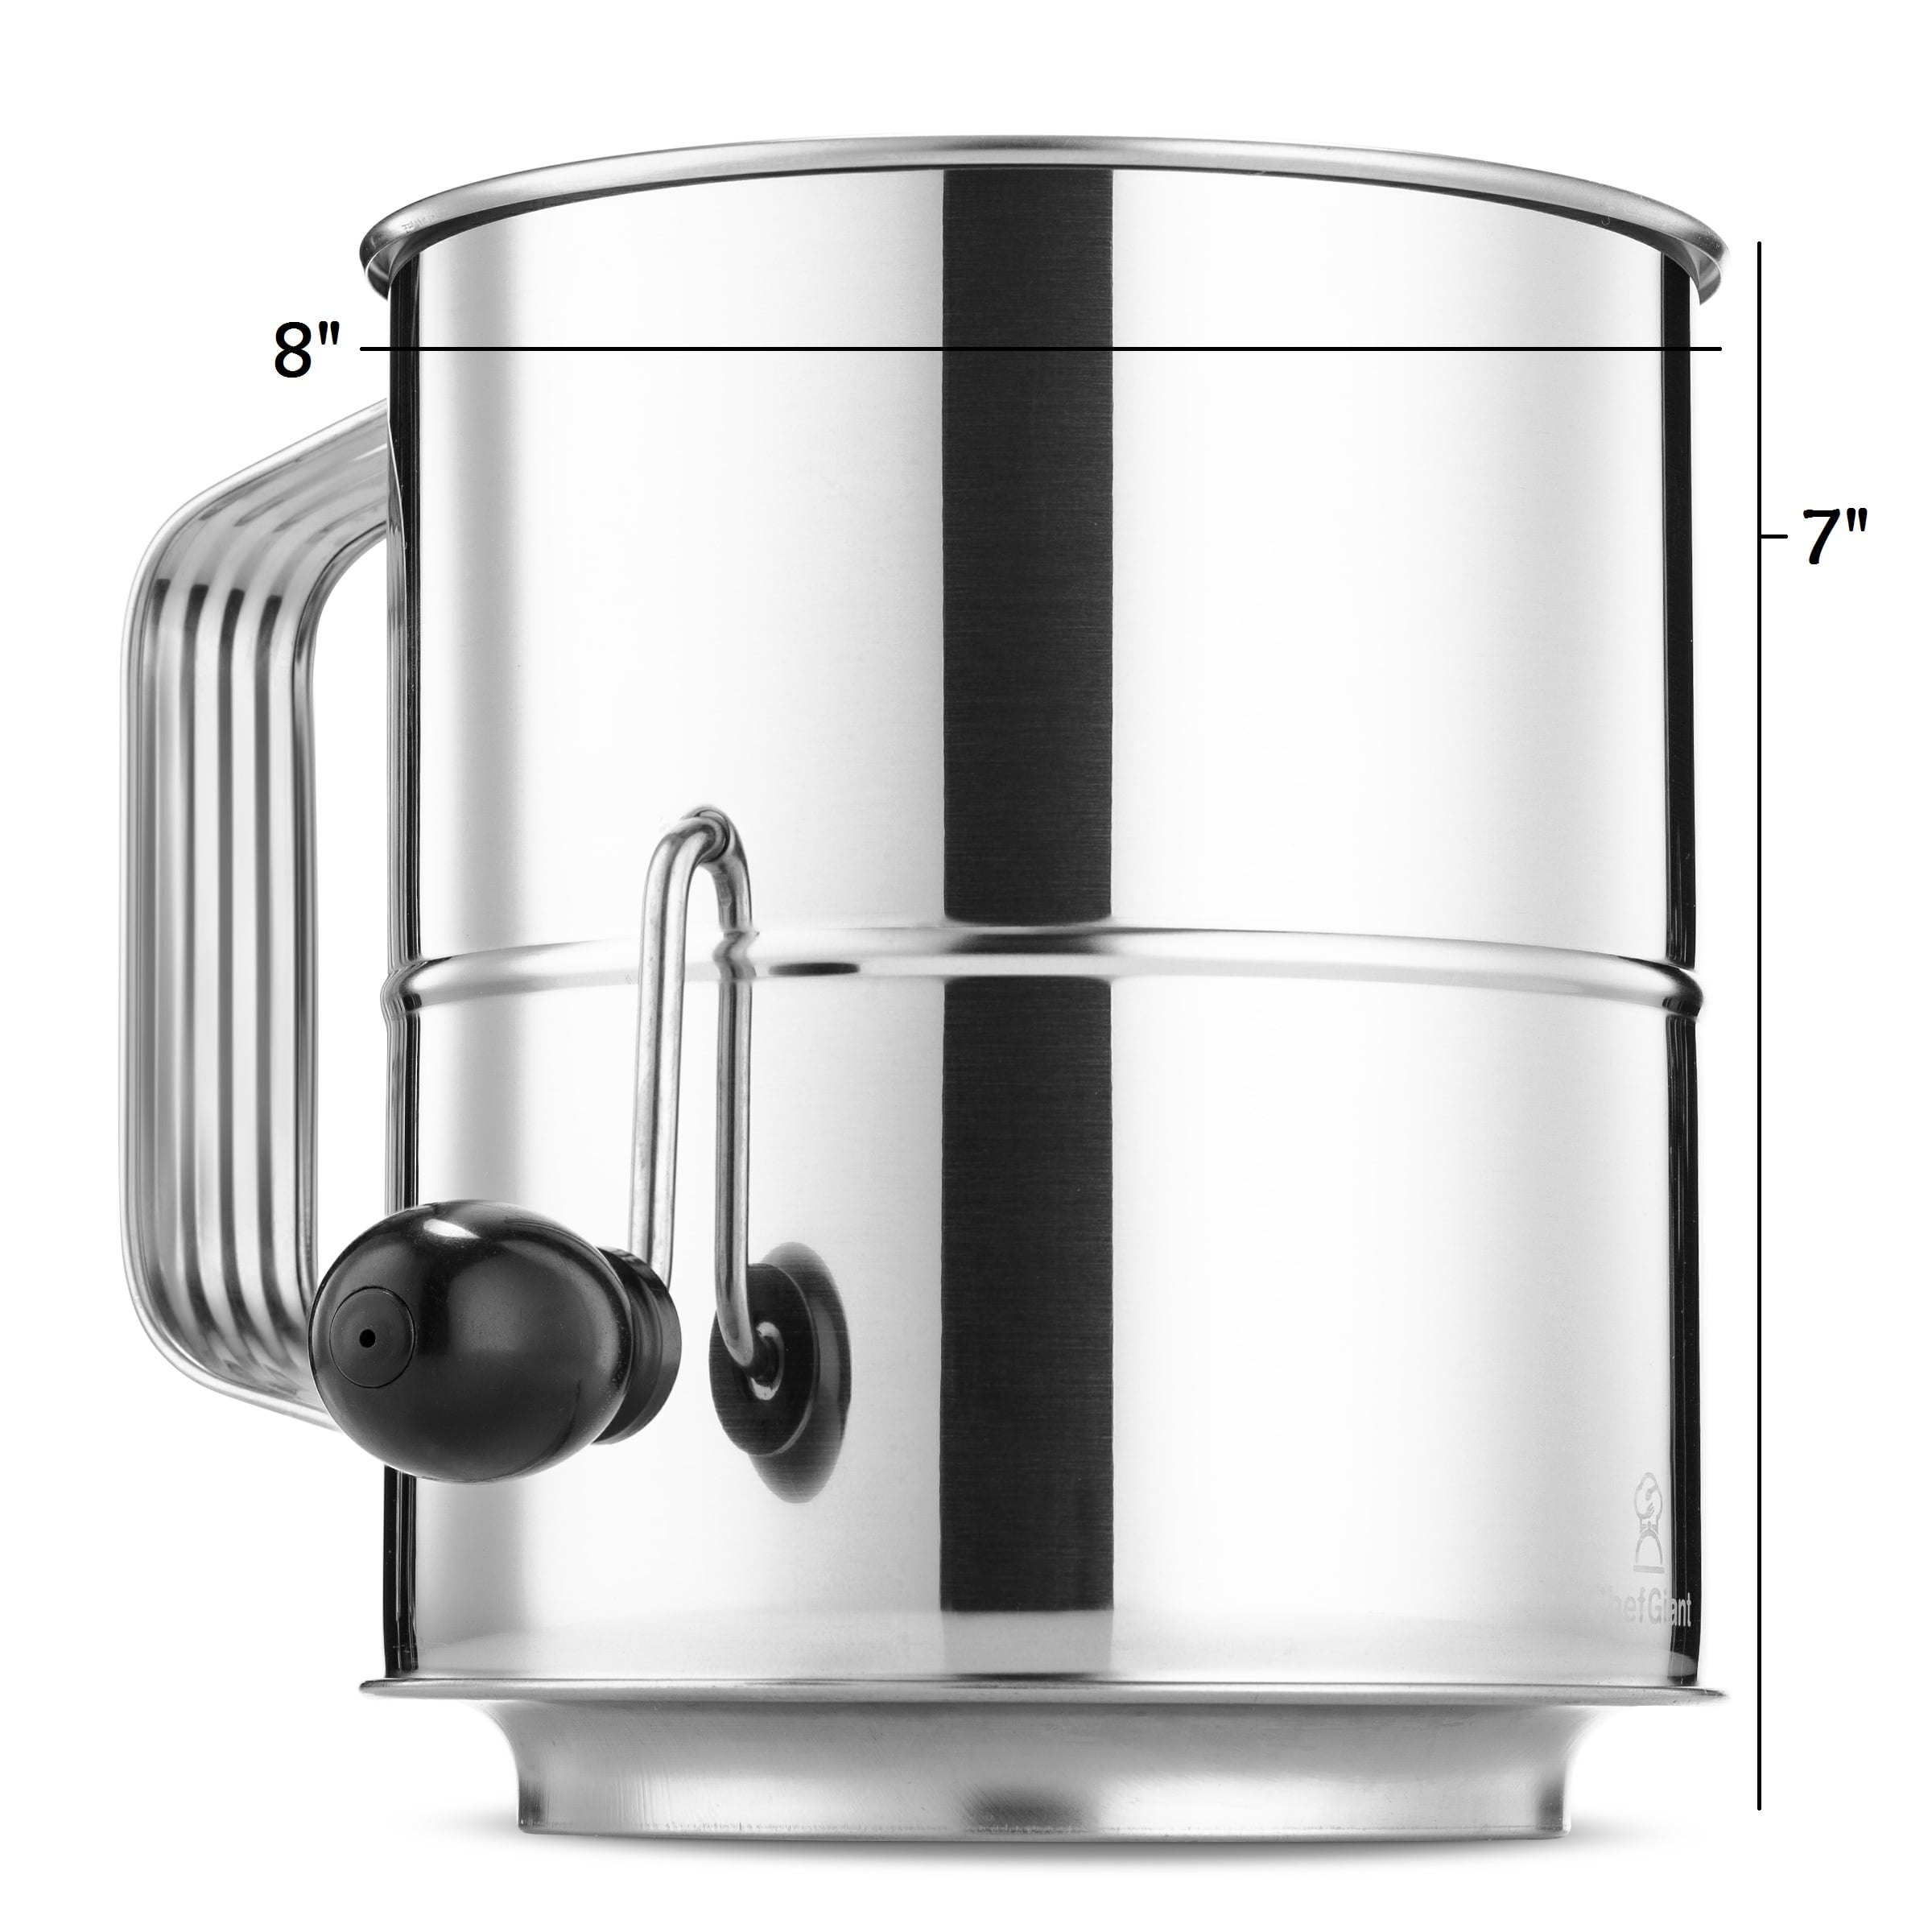 Stainless-Steel Flour Sifter, Norpro